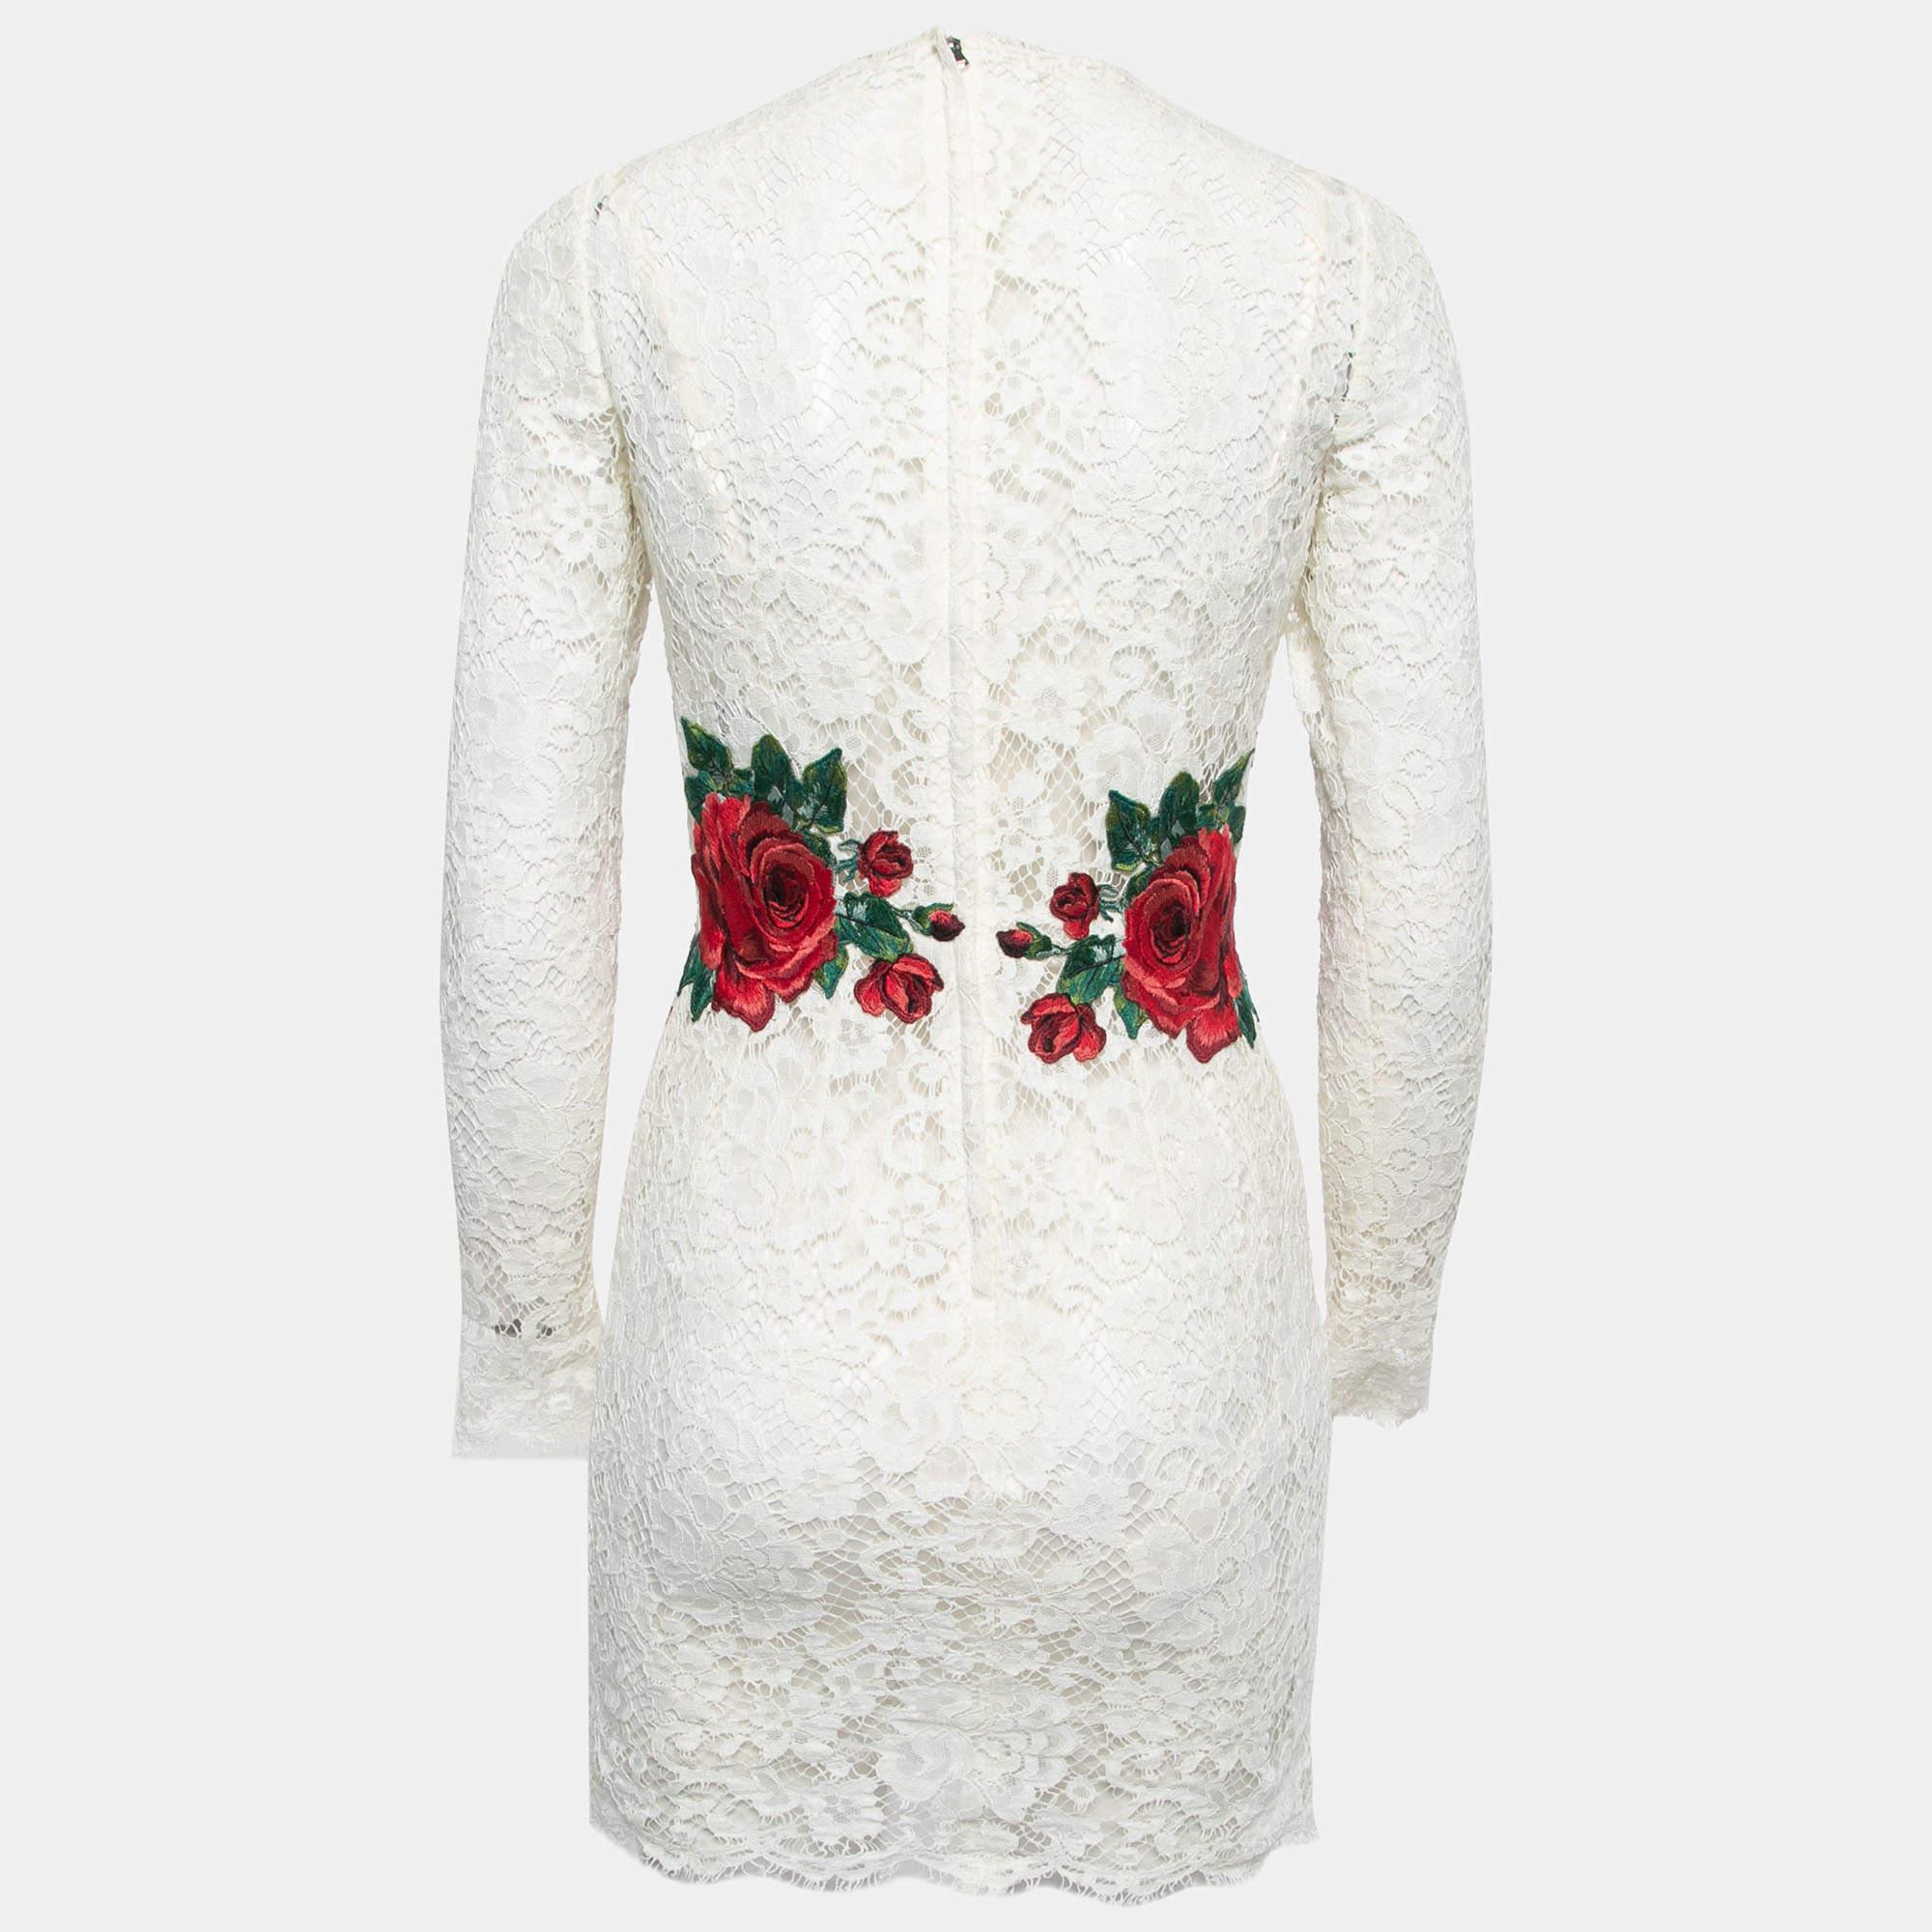 This Dolce & Gabbana mini dress brings elegant details and a lovely silhouette. It is made from lace with rose embroidery and is bound to give you comfort.

